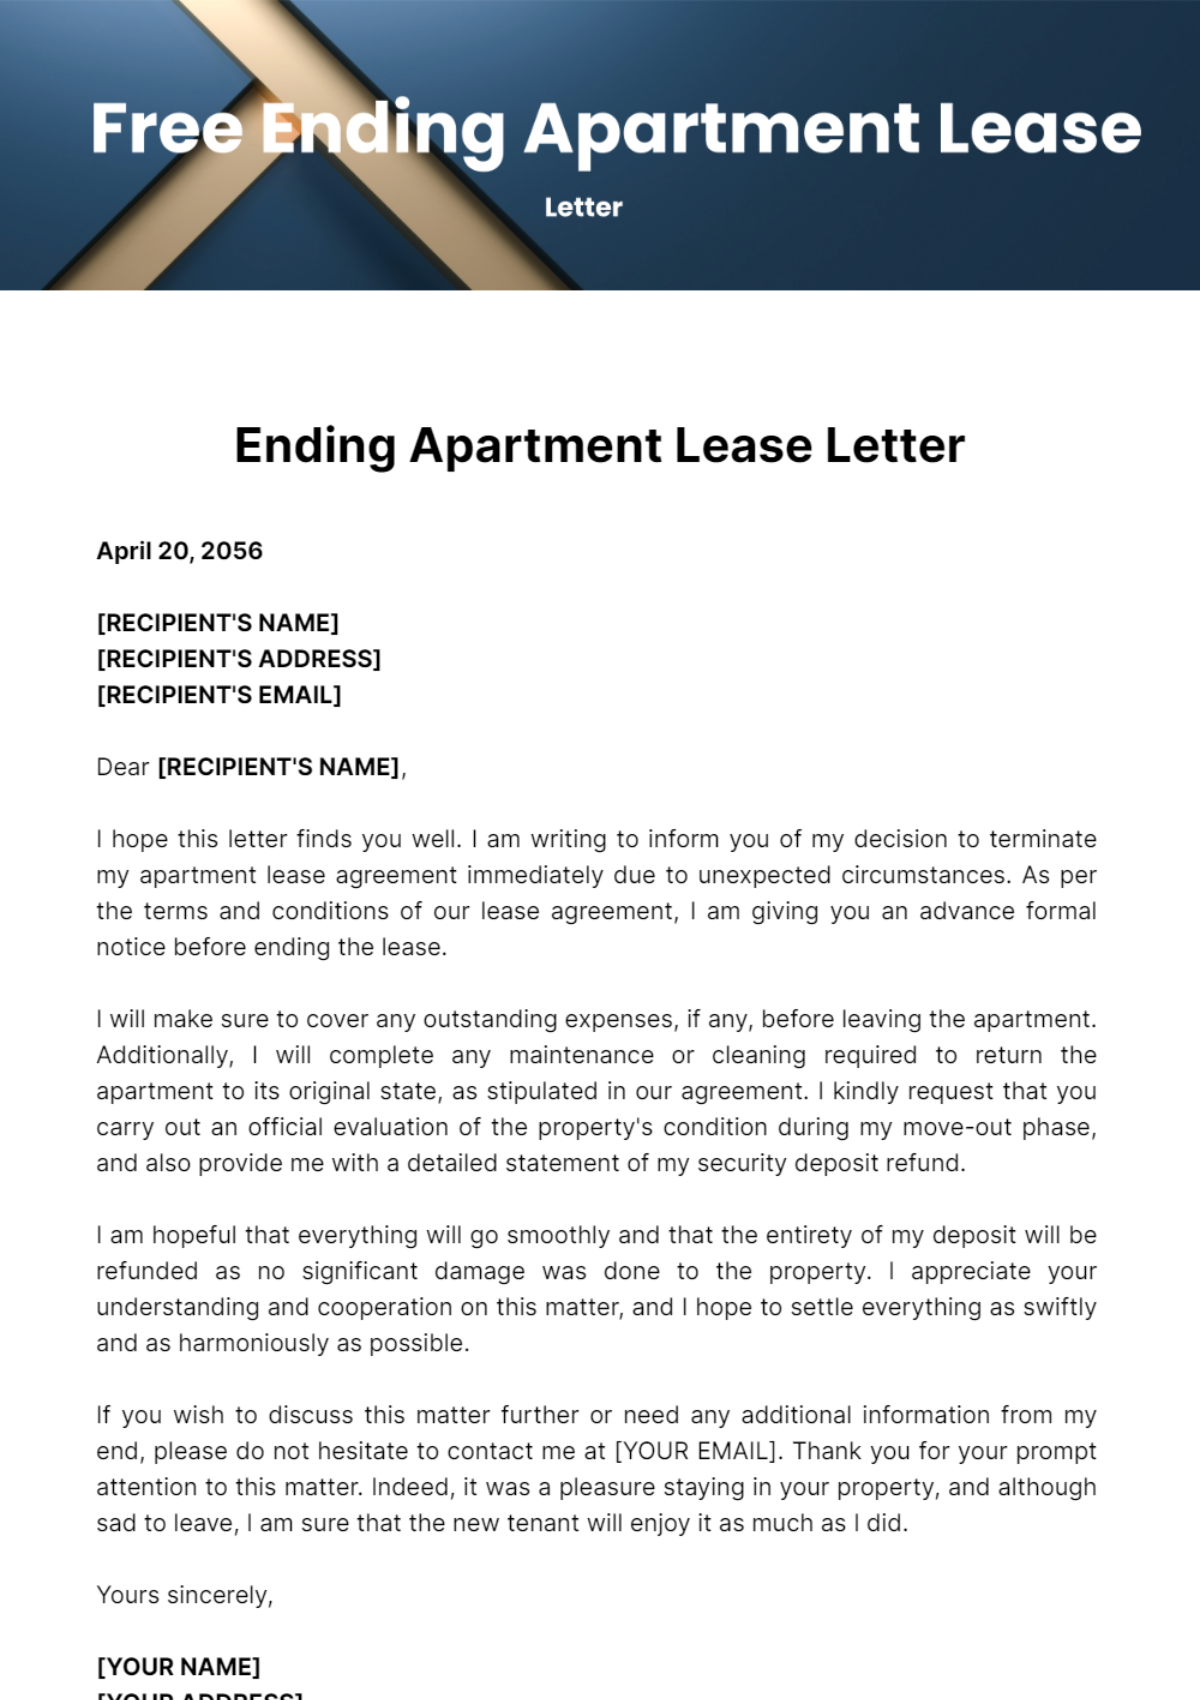 Free Ending Apartment Lease Letter Template